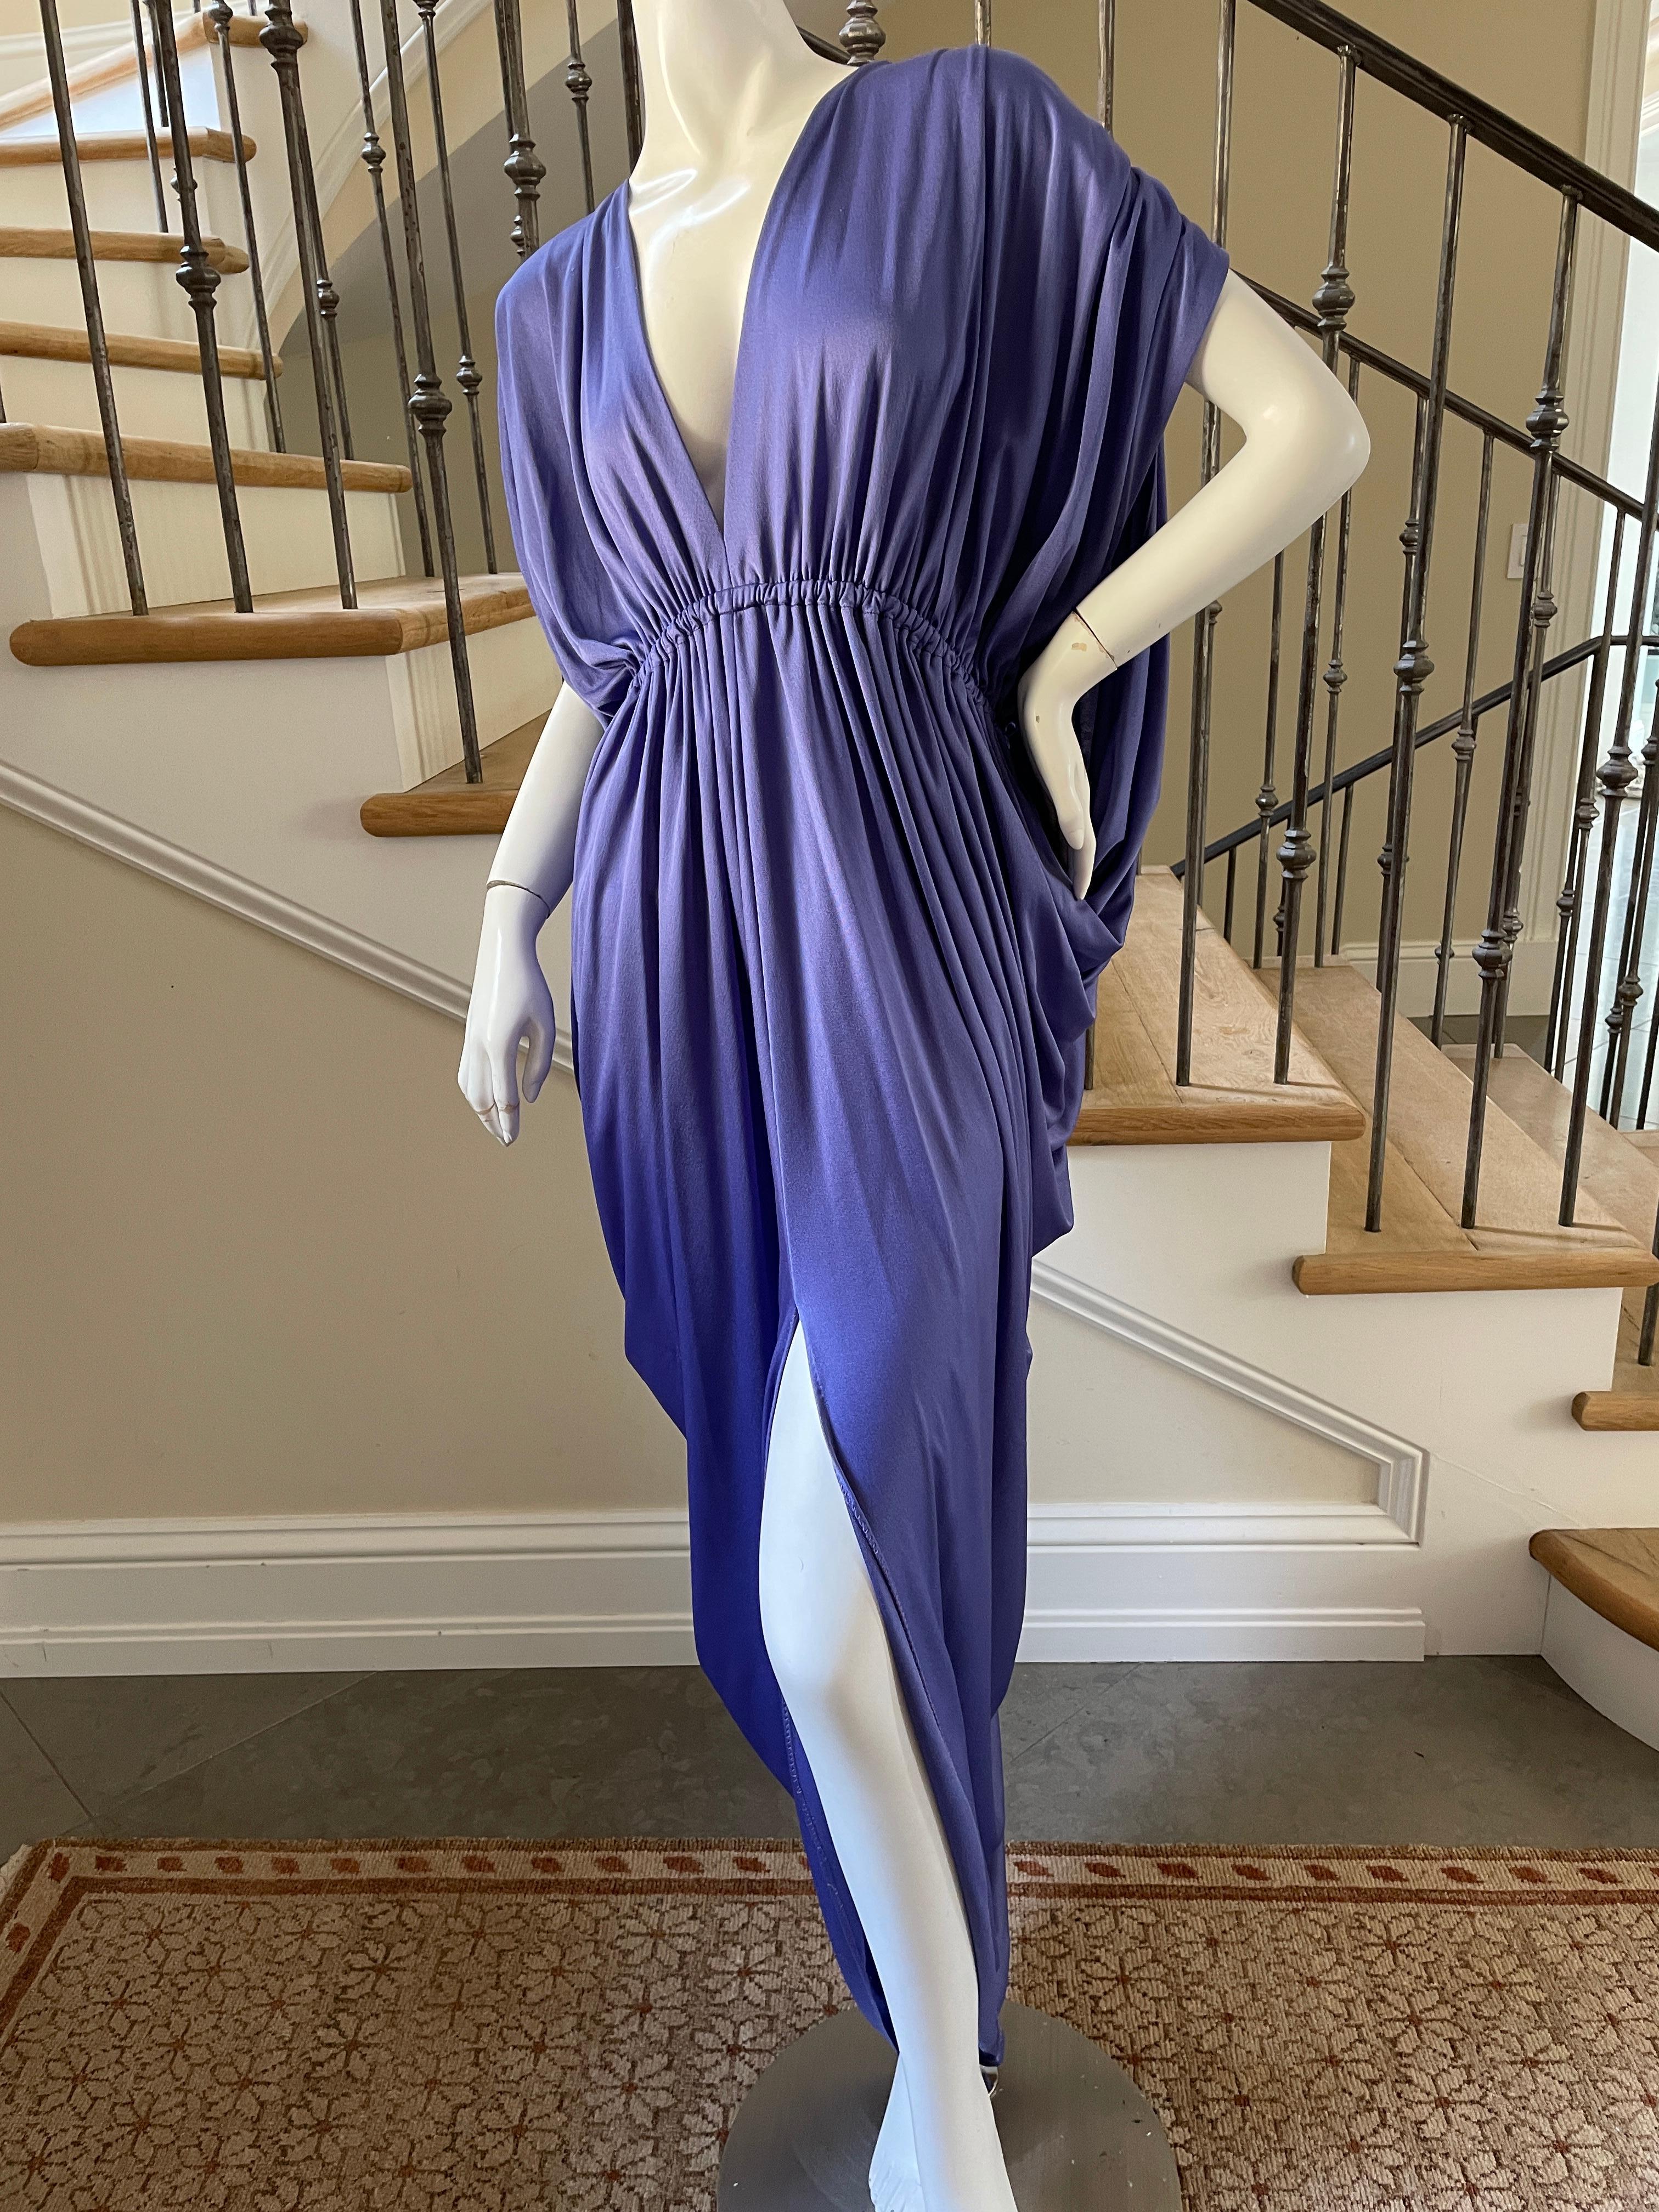 Wonderful deep purple caftan from Halston IV. 
Marked size Medium, but really one size fits all, the length is 58